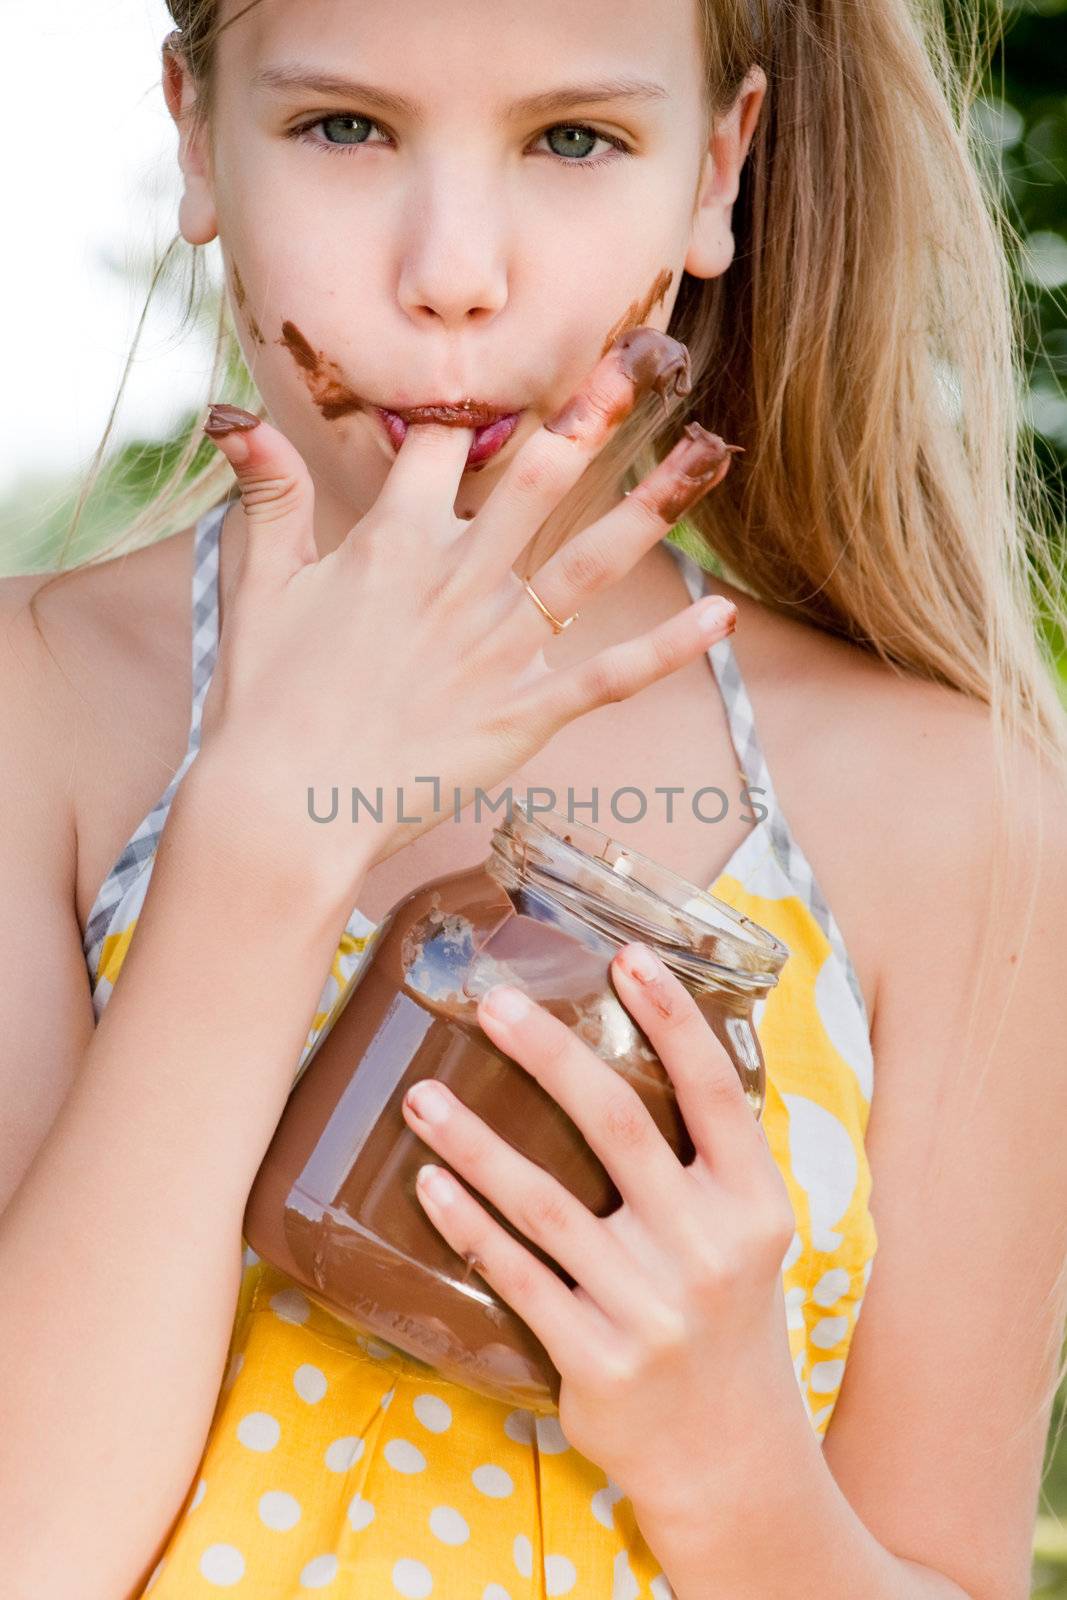 nutella girl by DNFStyle